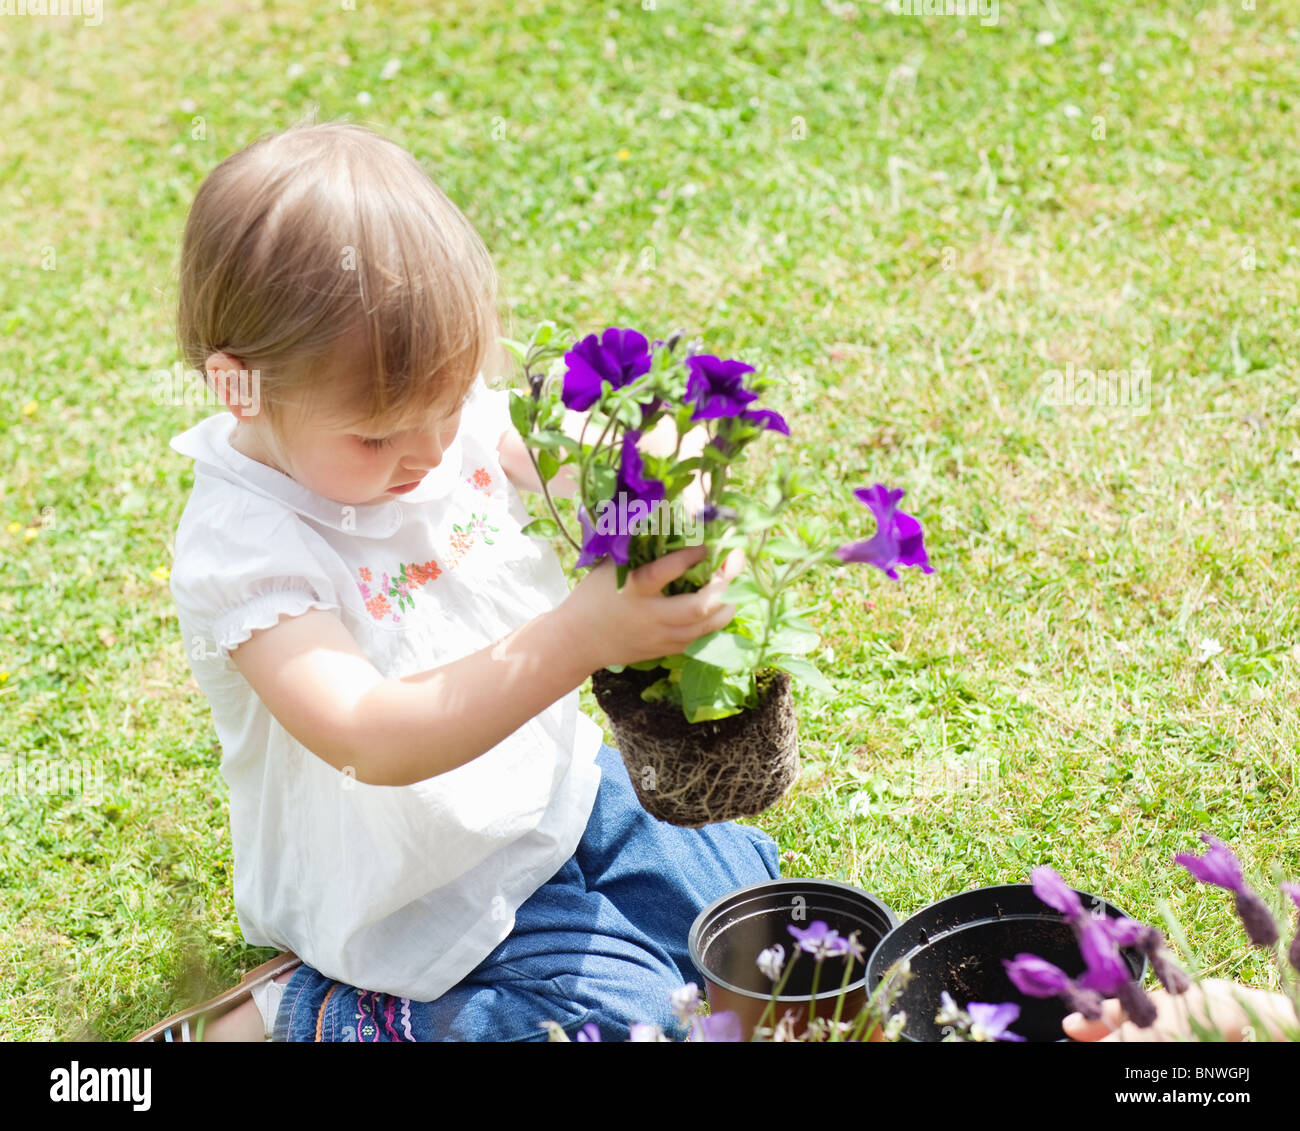 Child holding a flower Stock Photo